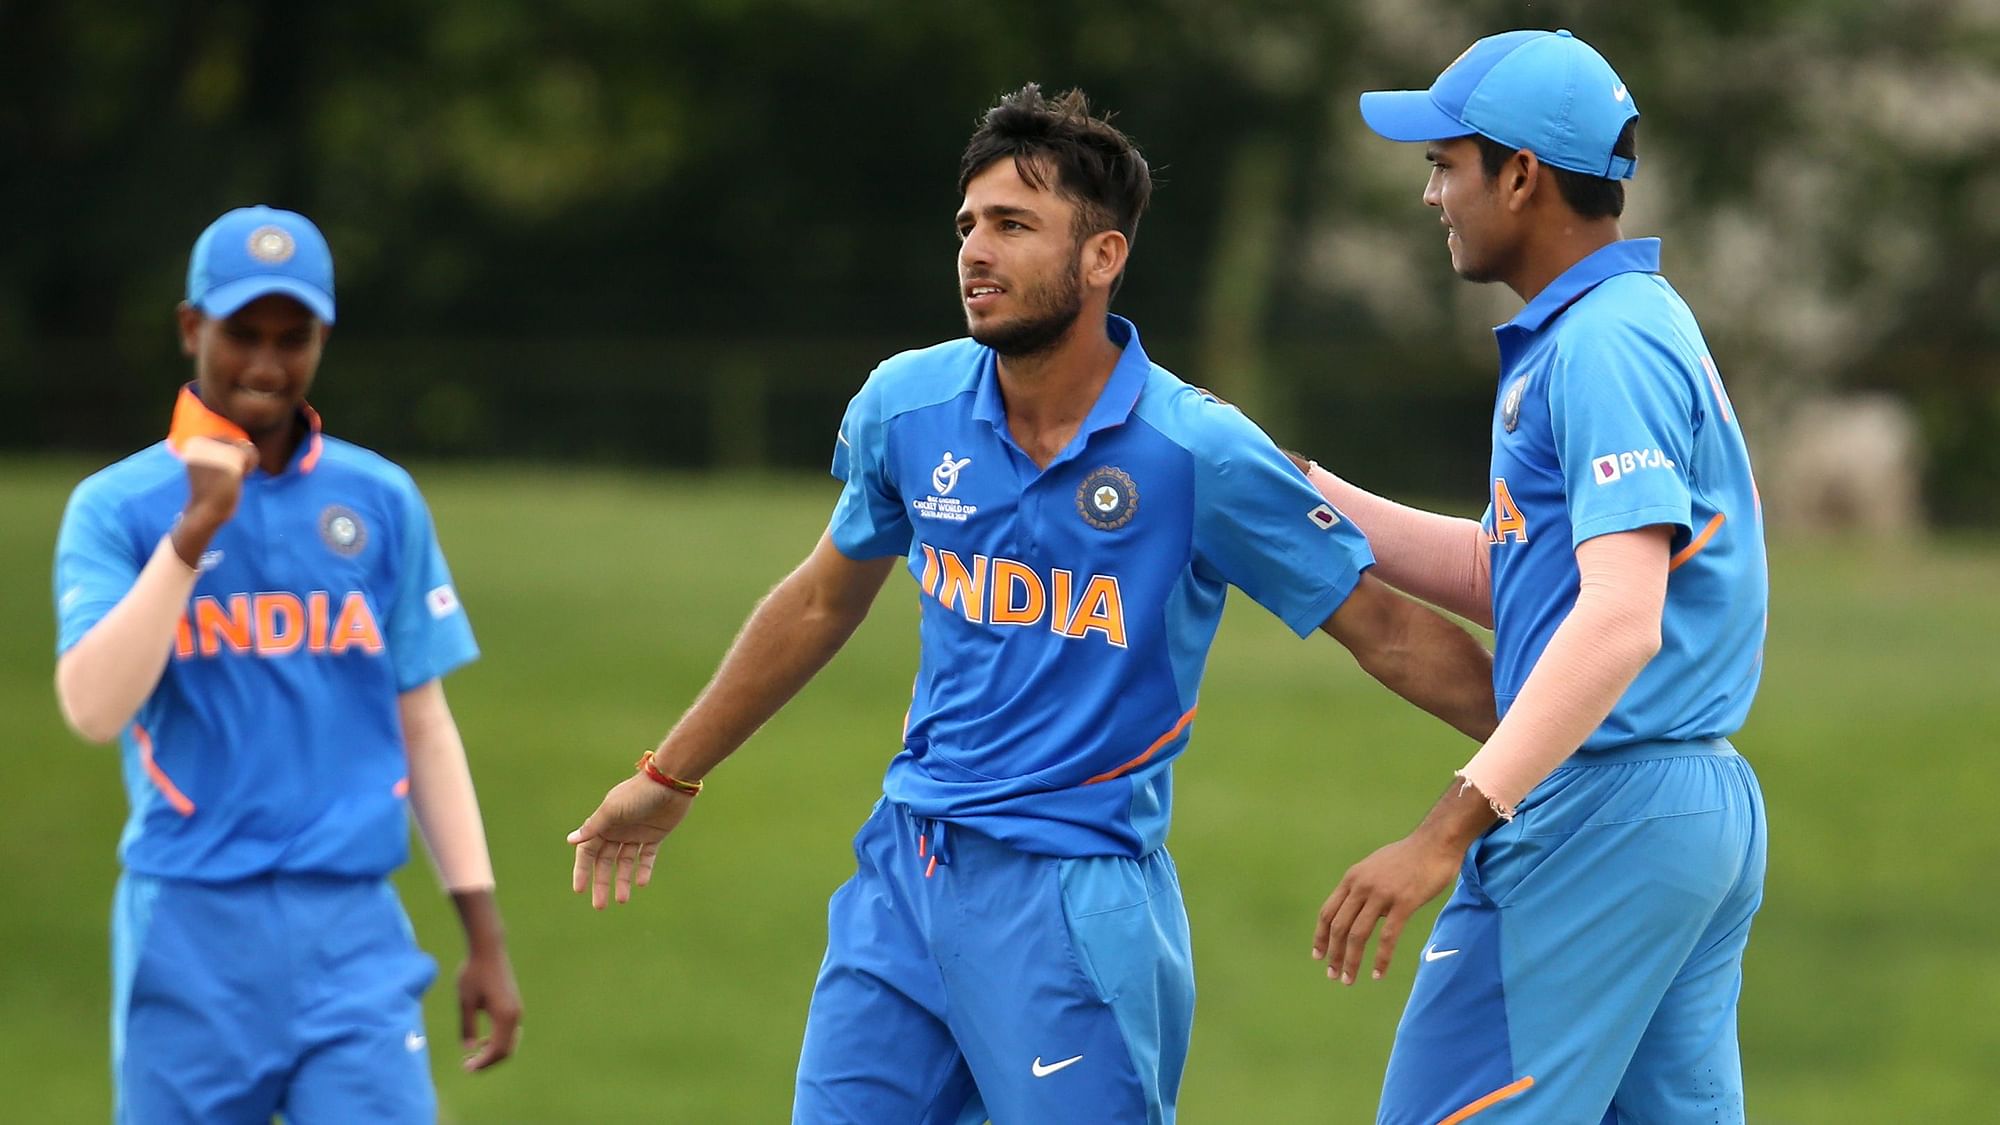 Ravi Bishnoi is the highest wicket-taker for India in the ongoing Under-19 World Cup with 10 scalps to his name in three matches.